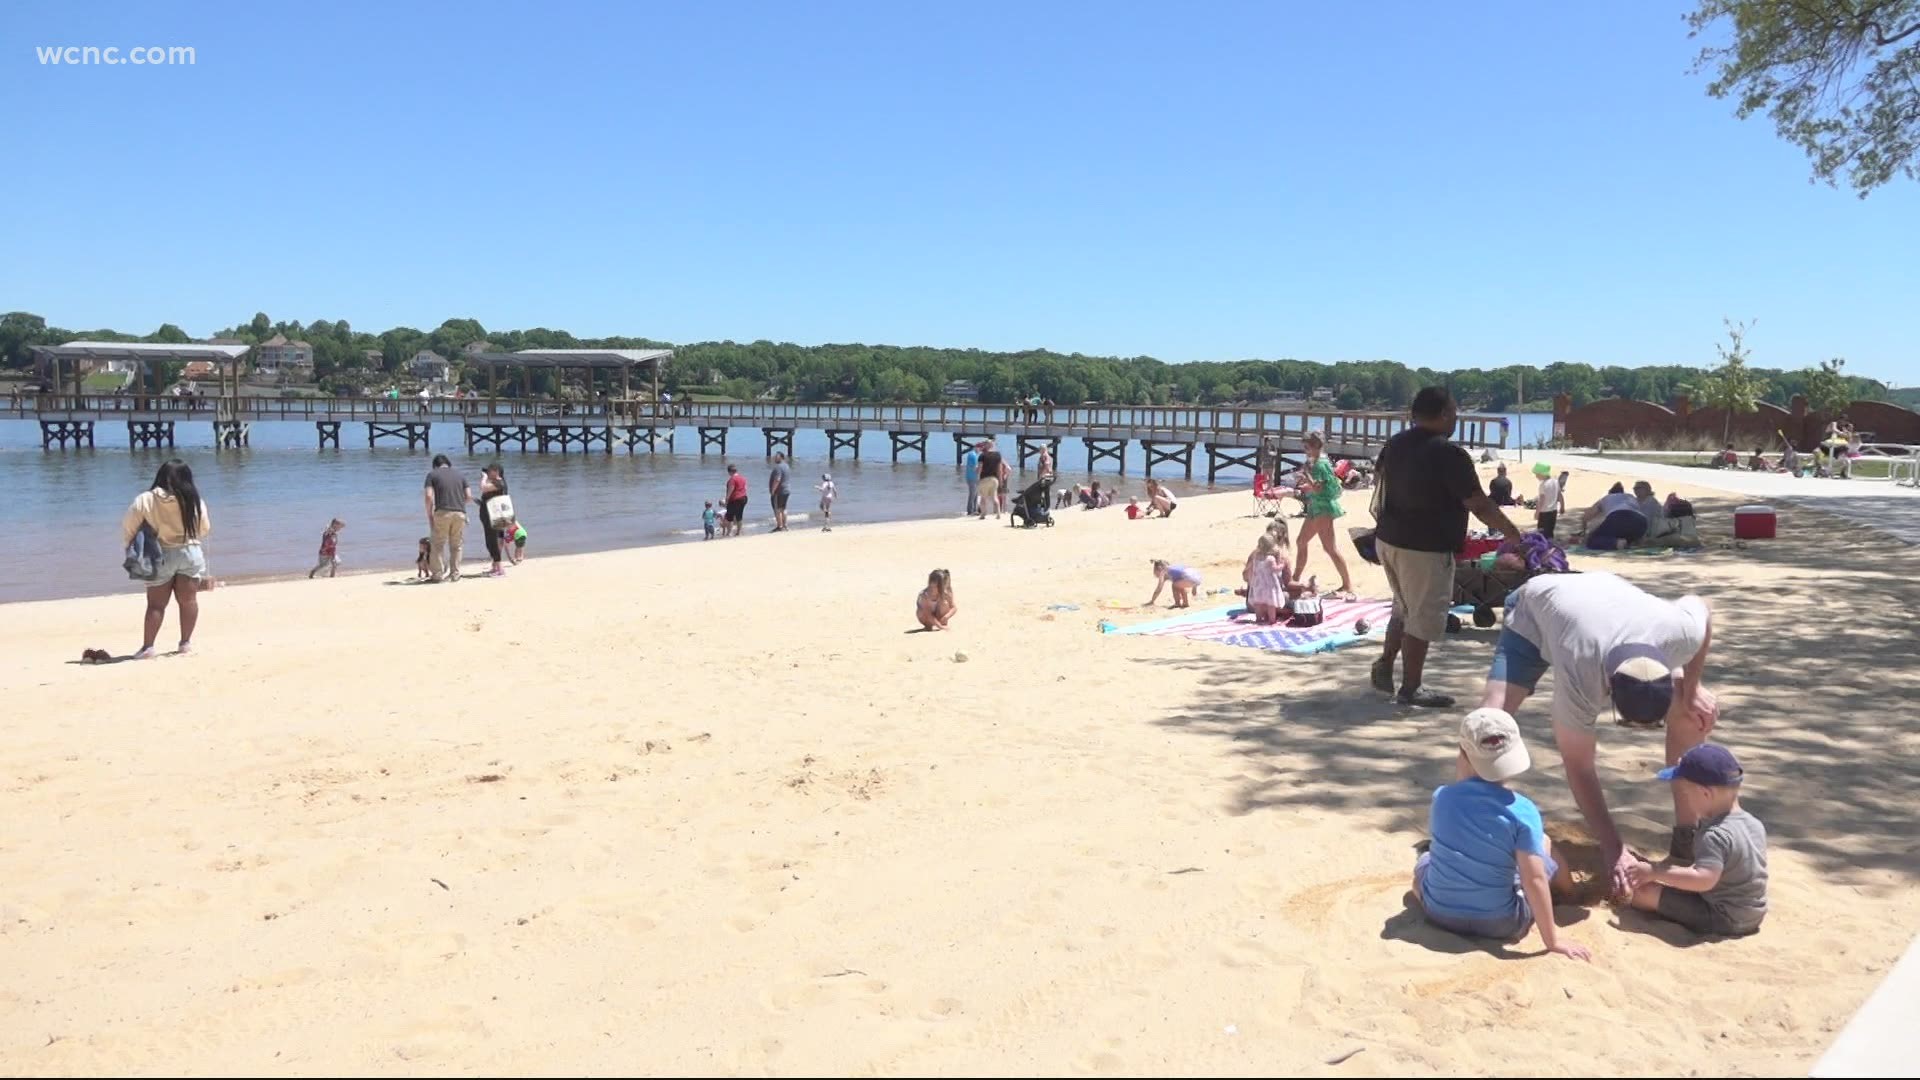 The Rock Hill park was closed during a $4.6 million renovation. The updates included a bigger beach, a new pier, and a spot for entertainment in the park.